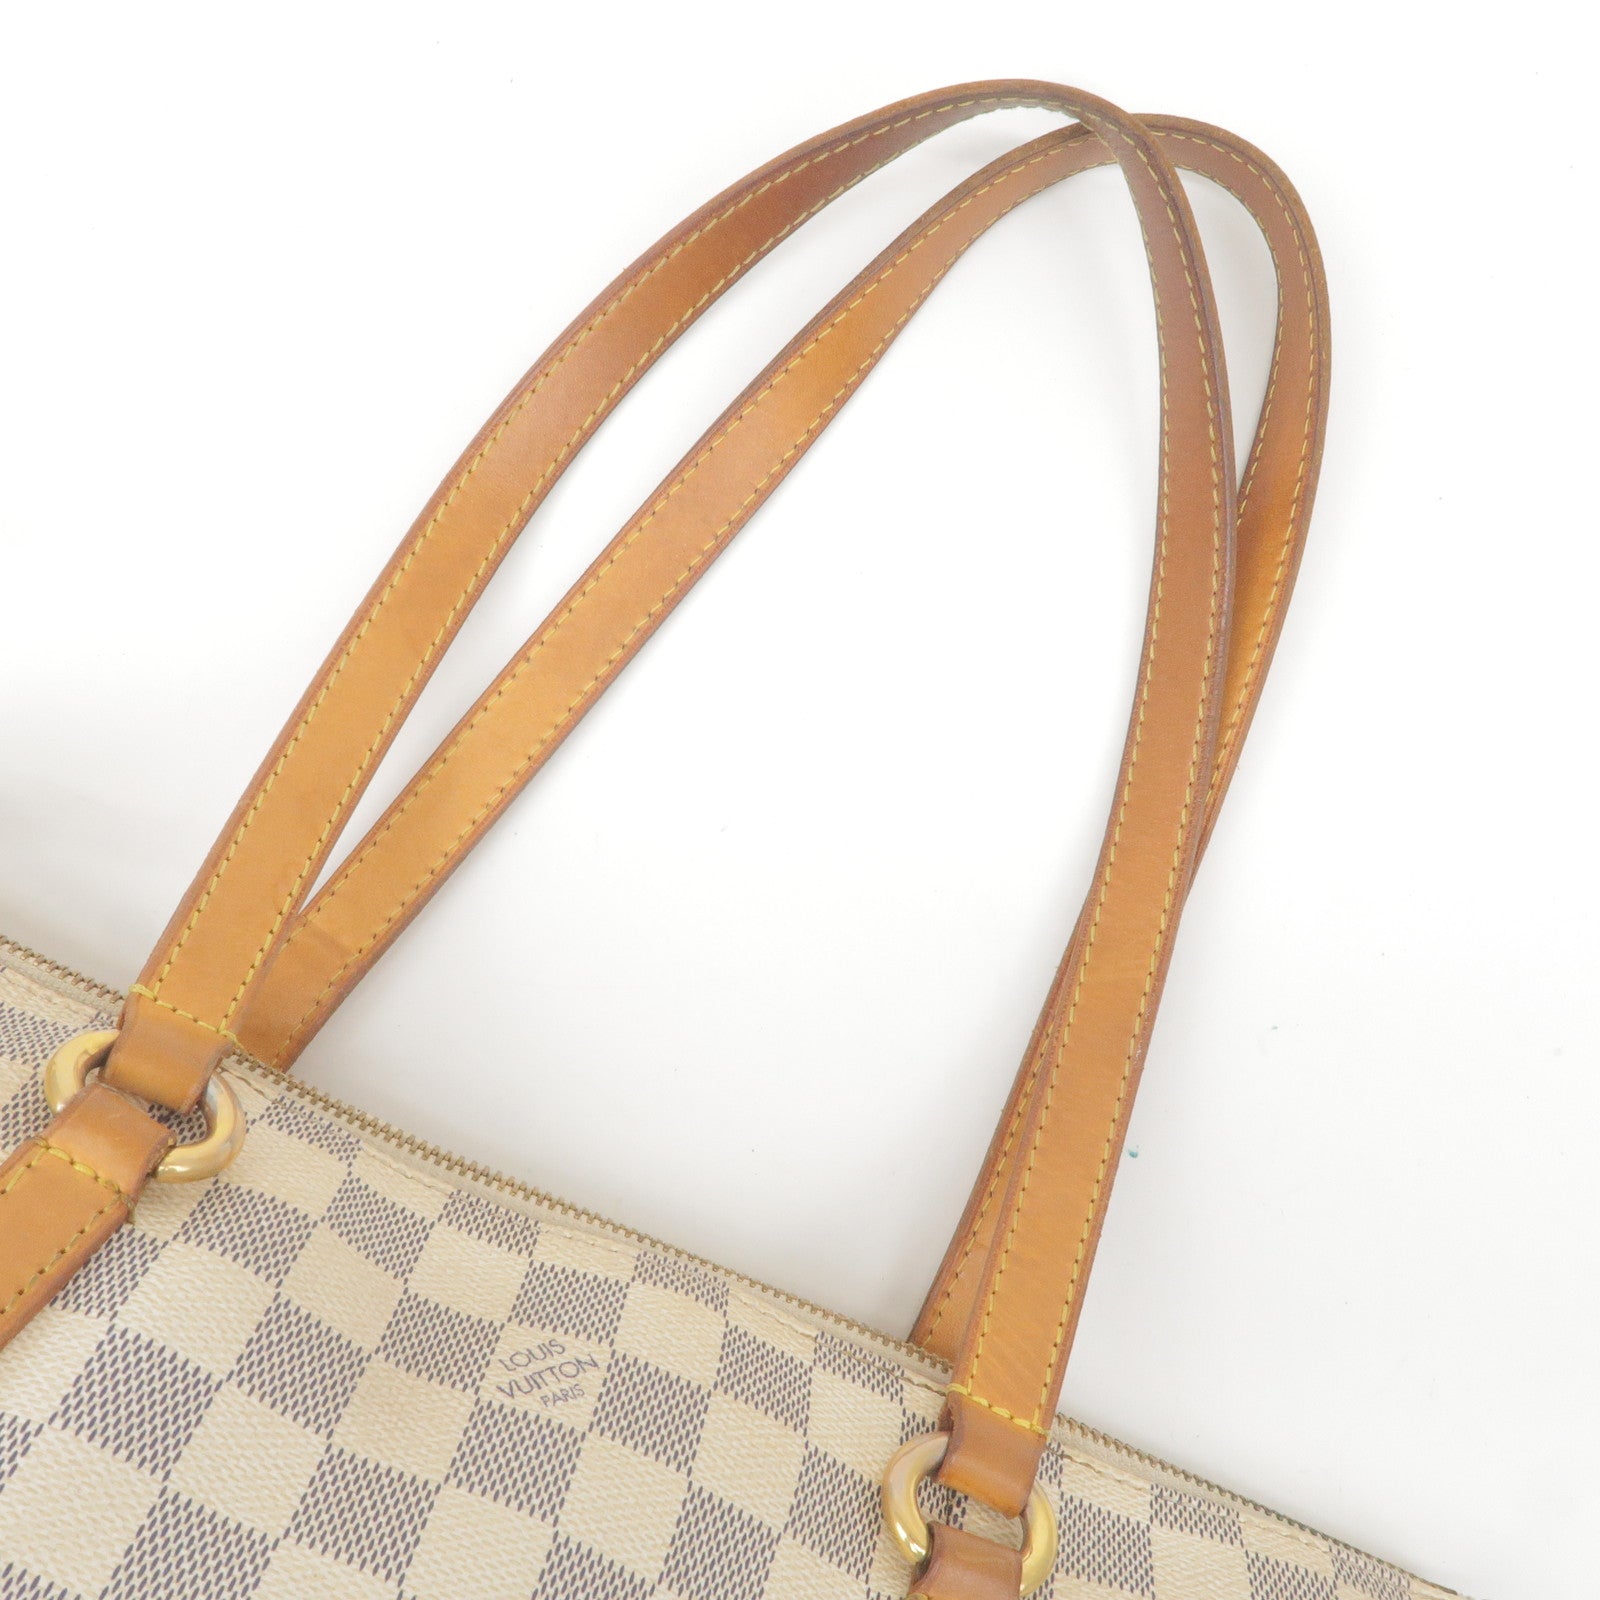 Louis Vuitton Damier Azur Canvas Leather Totally Pm Tote Bag in Black